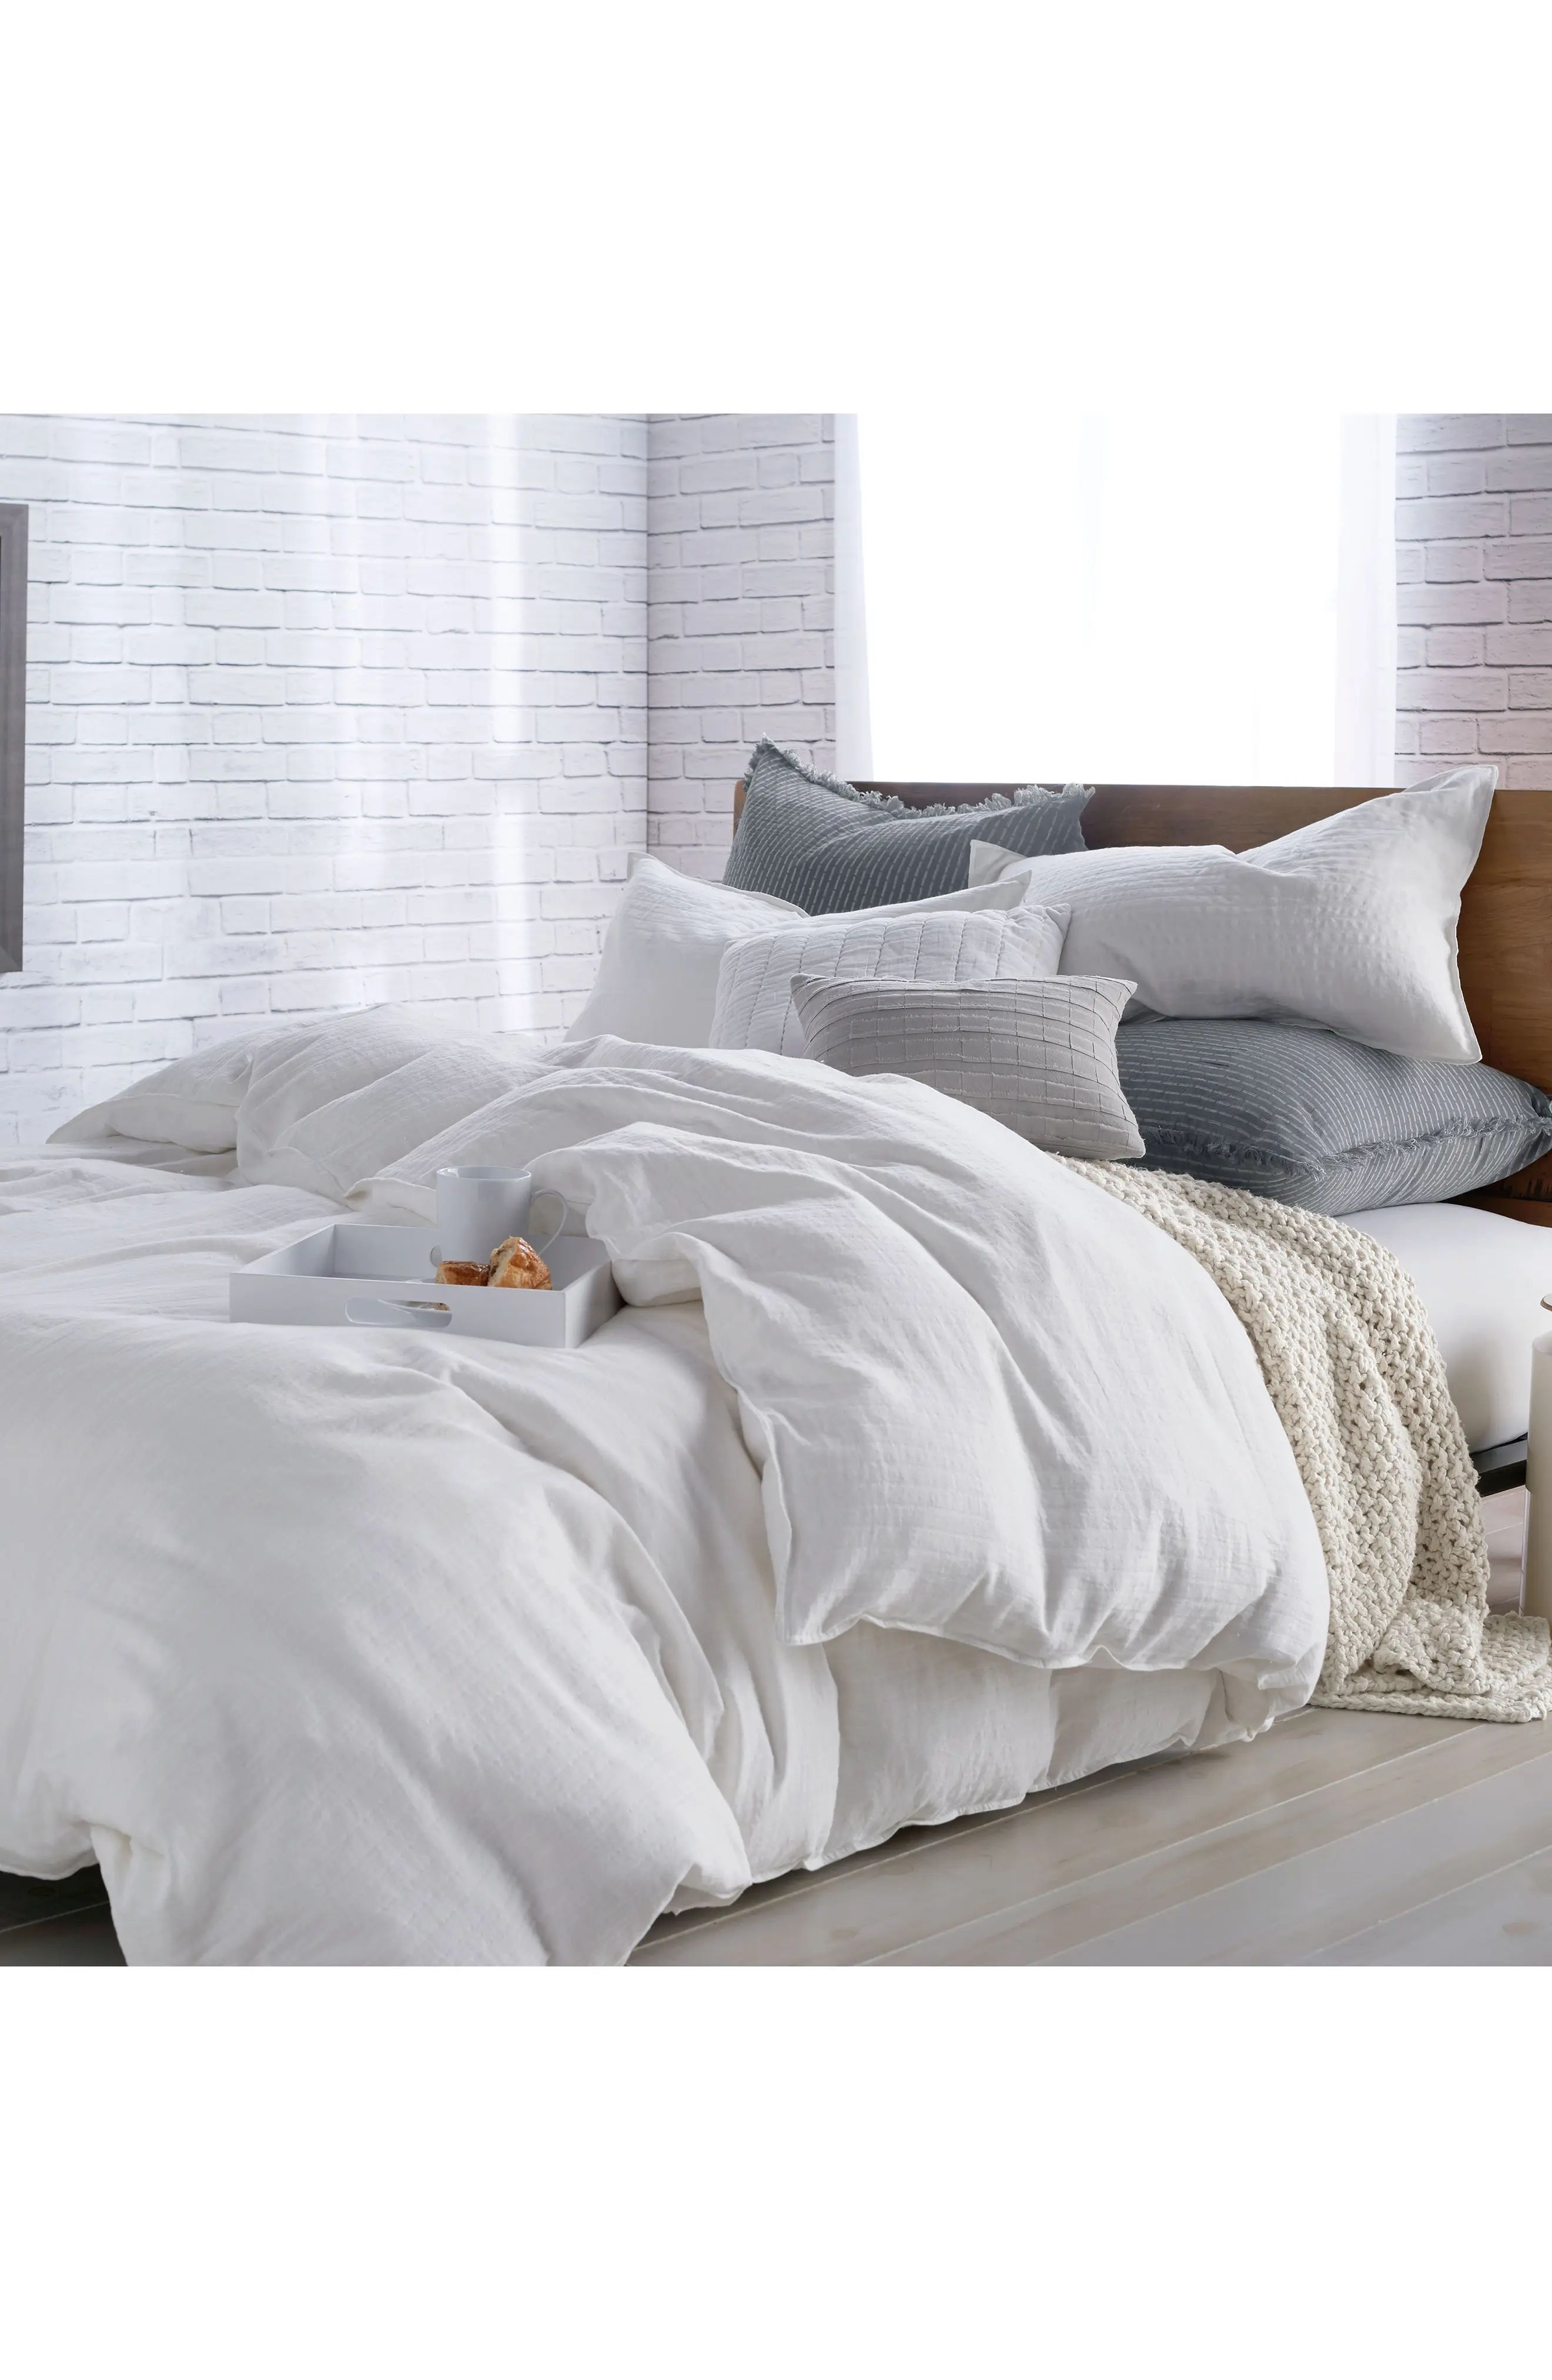 Dkny Pure Comfy White Duvet Cover, Size Full/Queen - White | Nordstrom